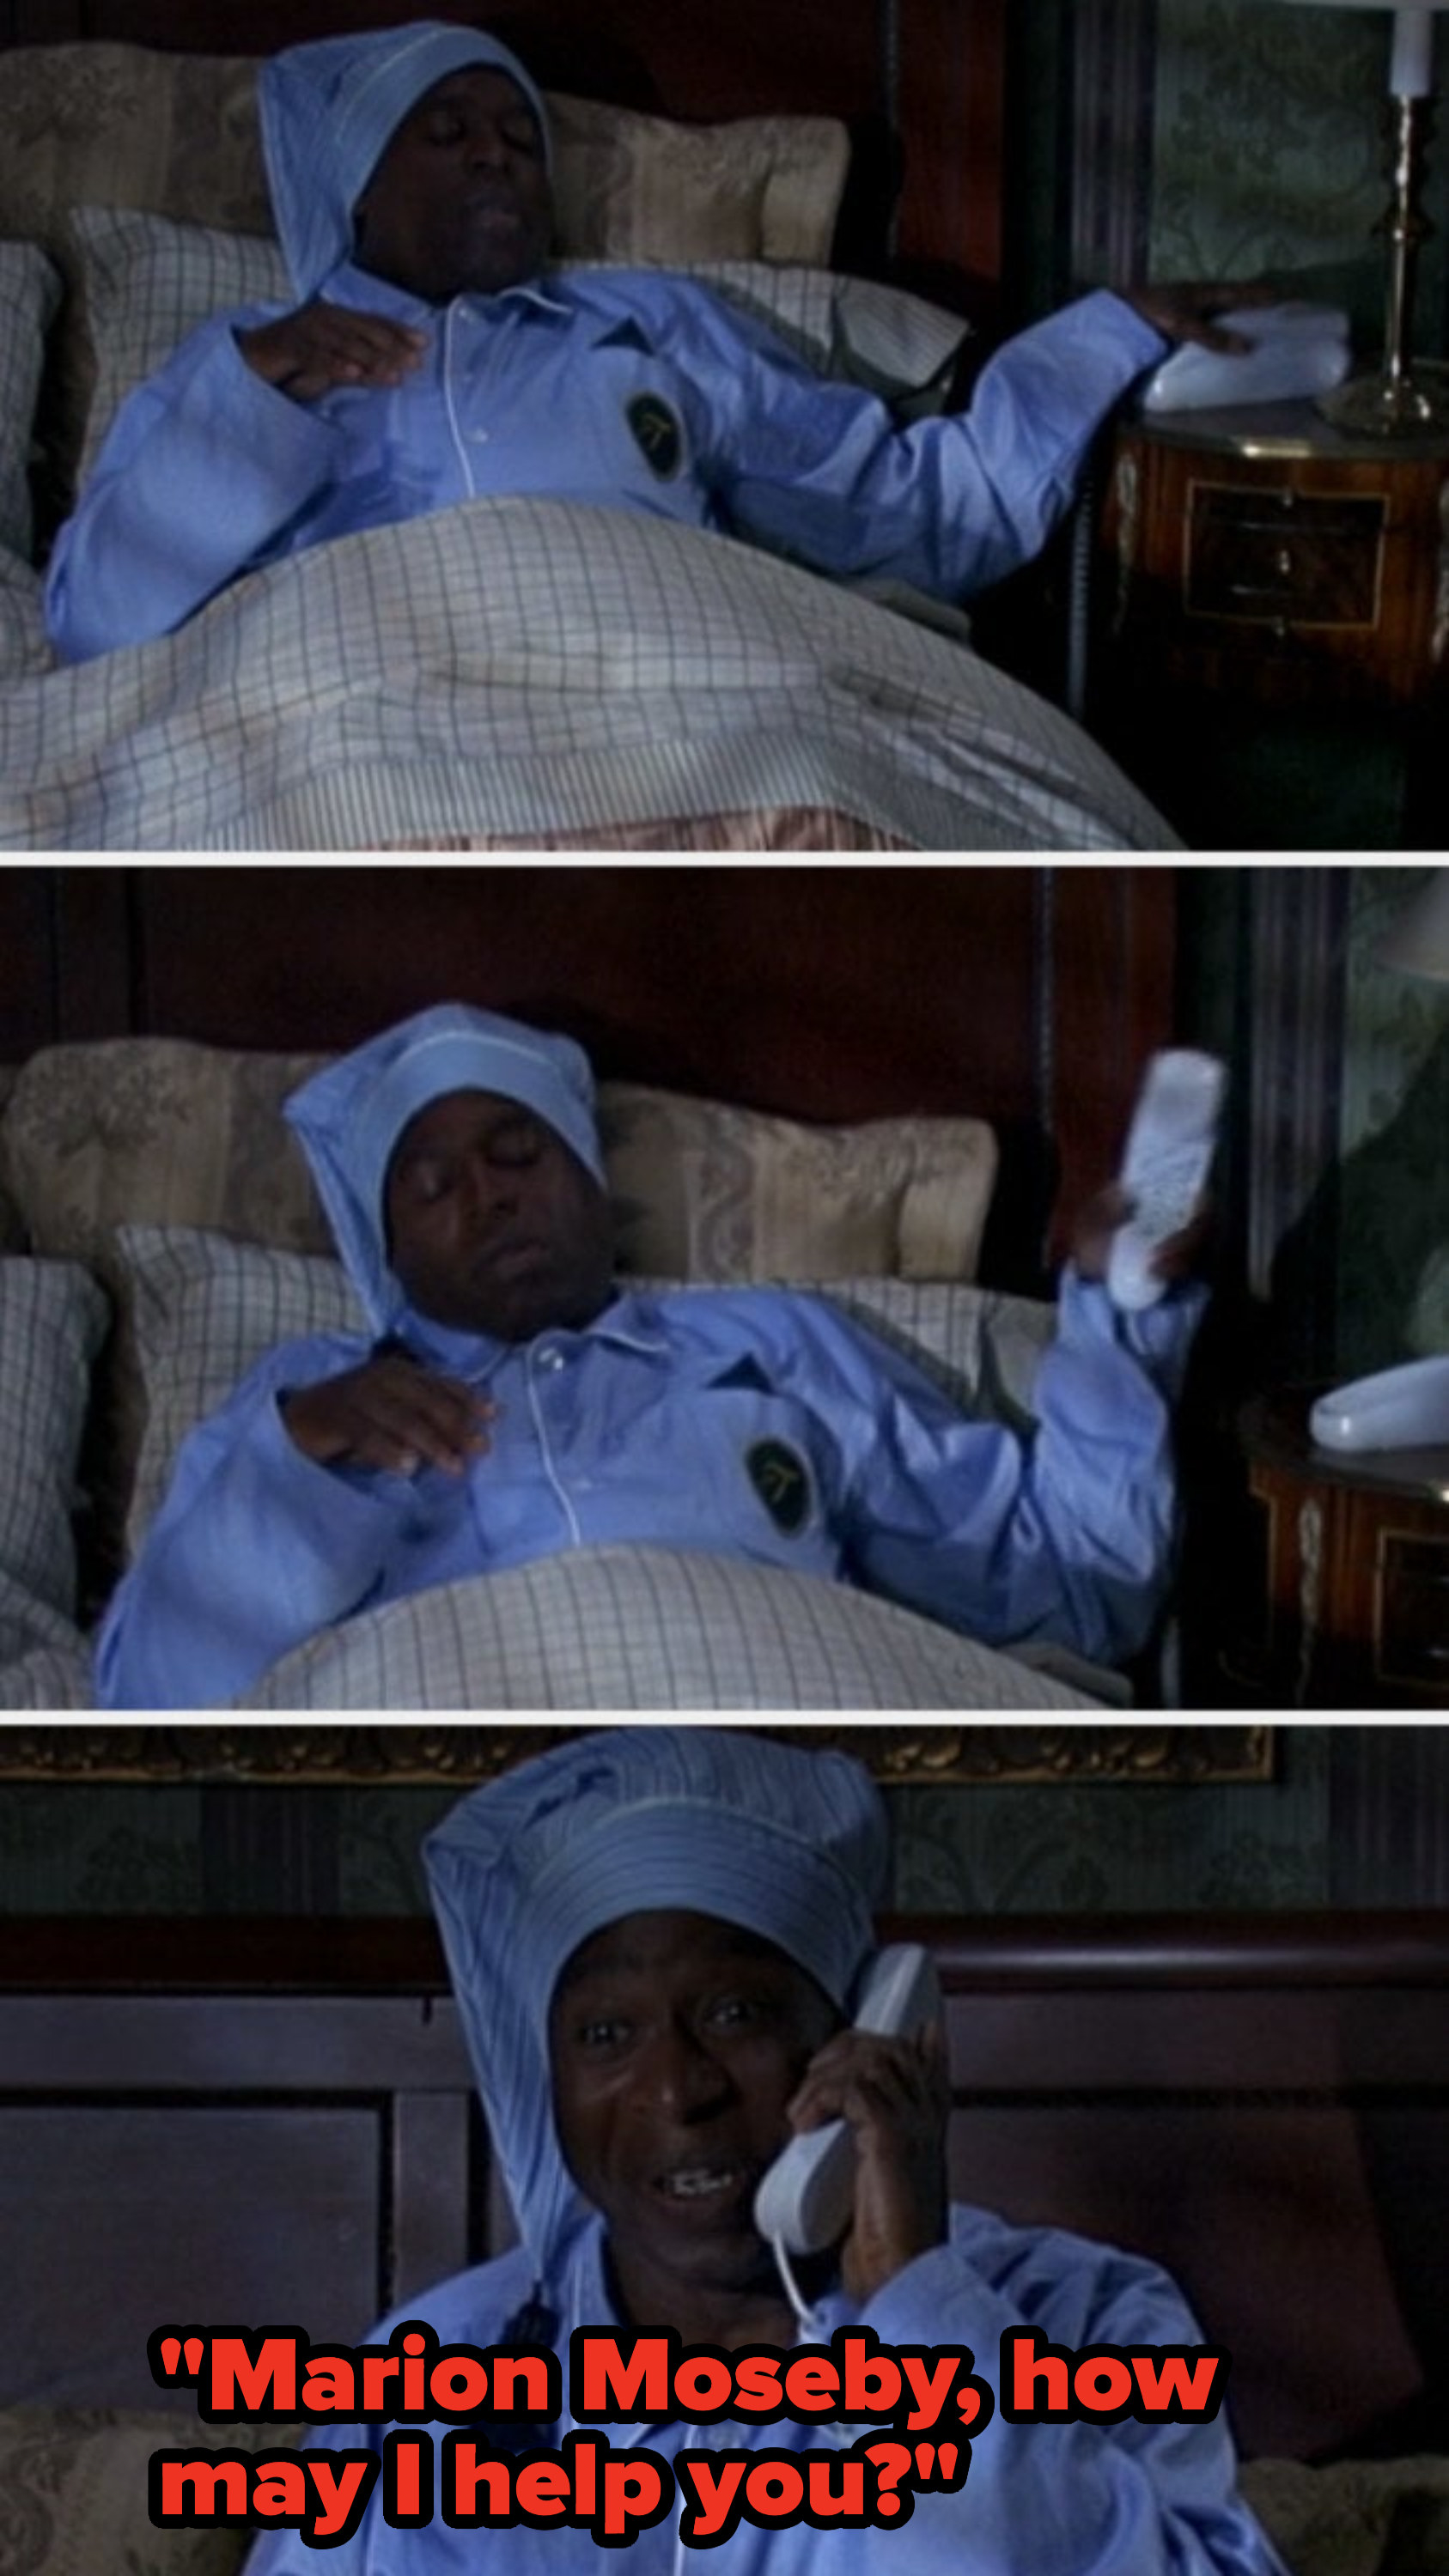 Mr. Moseby answers his phone in the middle of the night